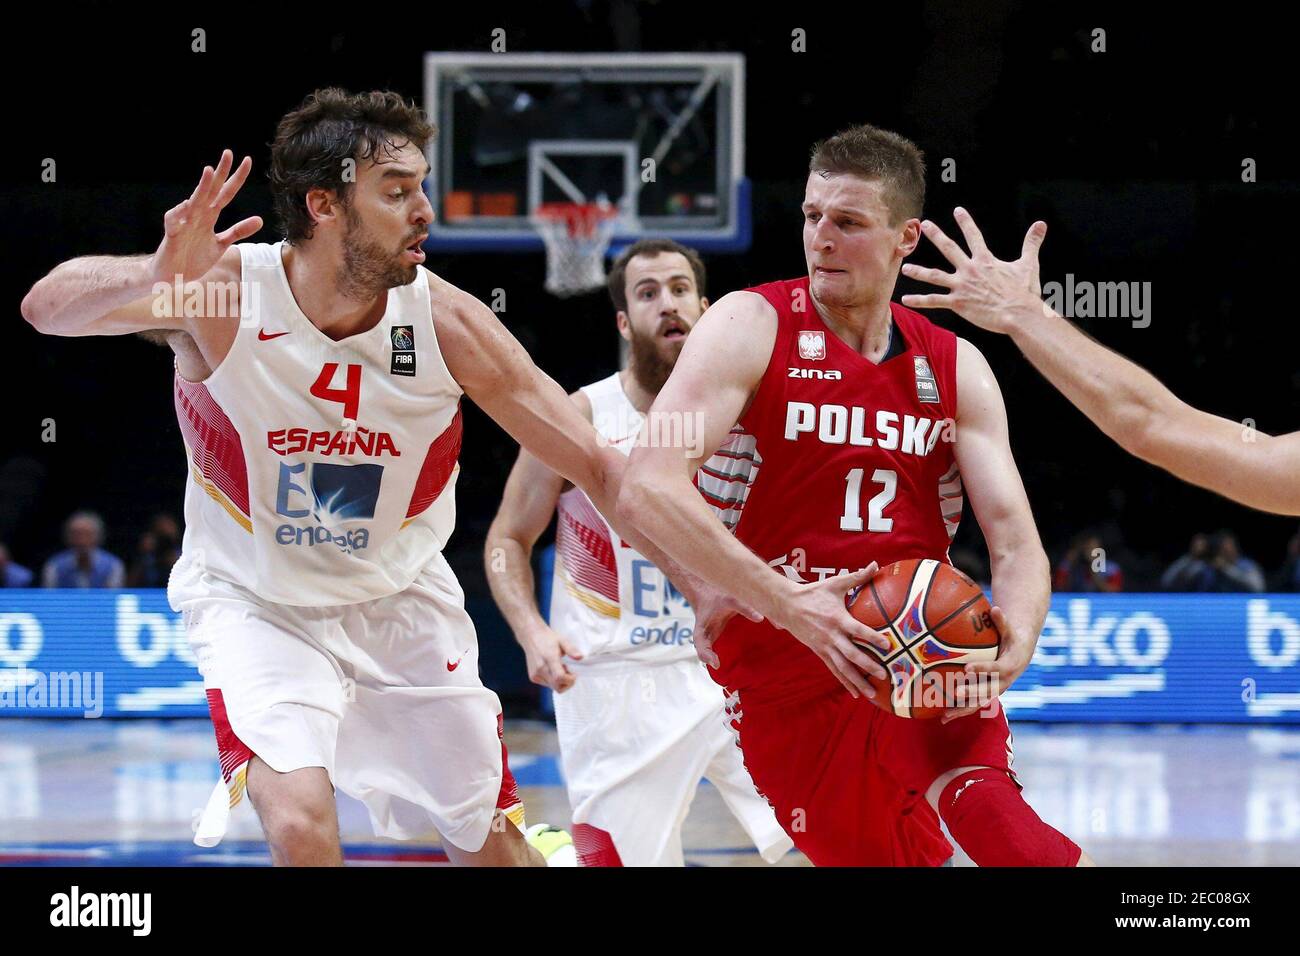 Poland's Adam Waczynski goes for the basket against Spain's Pau Gasol  during their 2015 EuroBasket 2015 round of 16 match at the Pierre Mauroy  stadium in Villeneuve d'Ascq near Lille, France, September